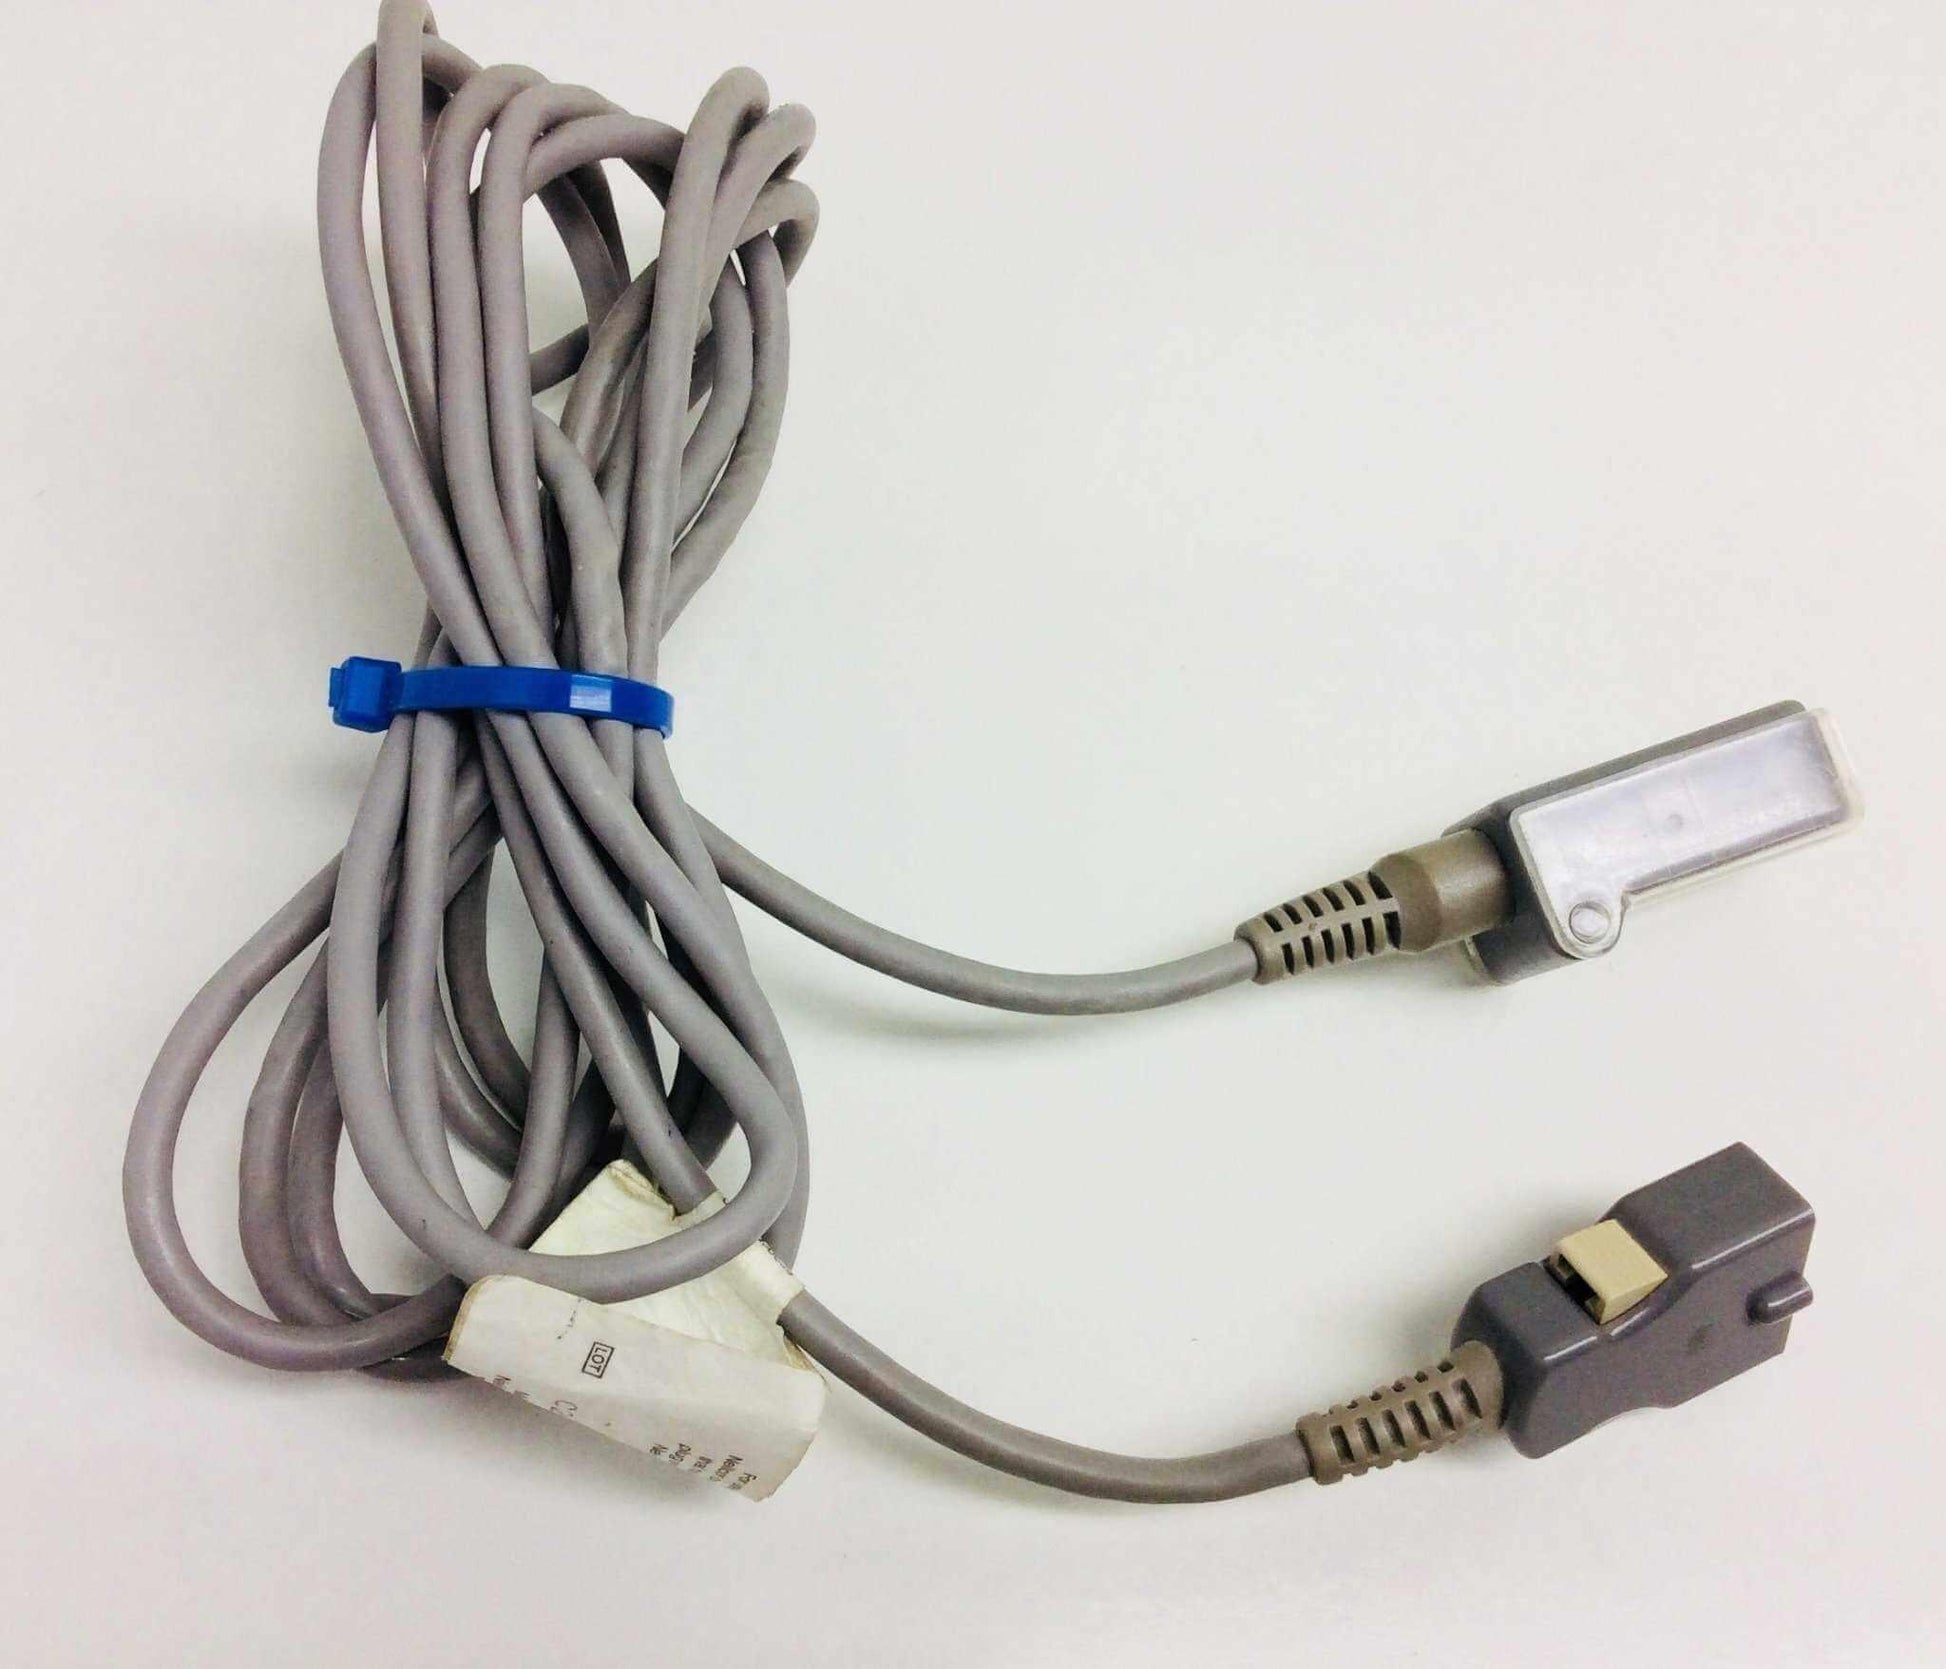 USED Nellcor 7 Pin SpO2 Adapter Cable MC-10 Warranty FREE Shipping - MBR Medicals